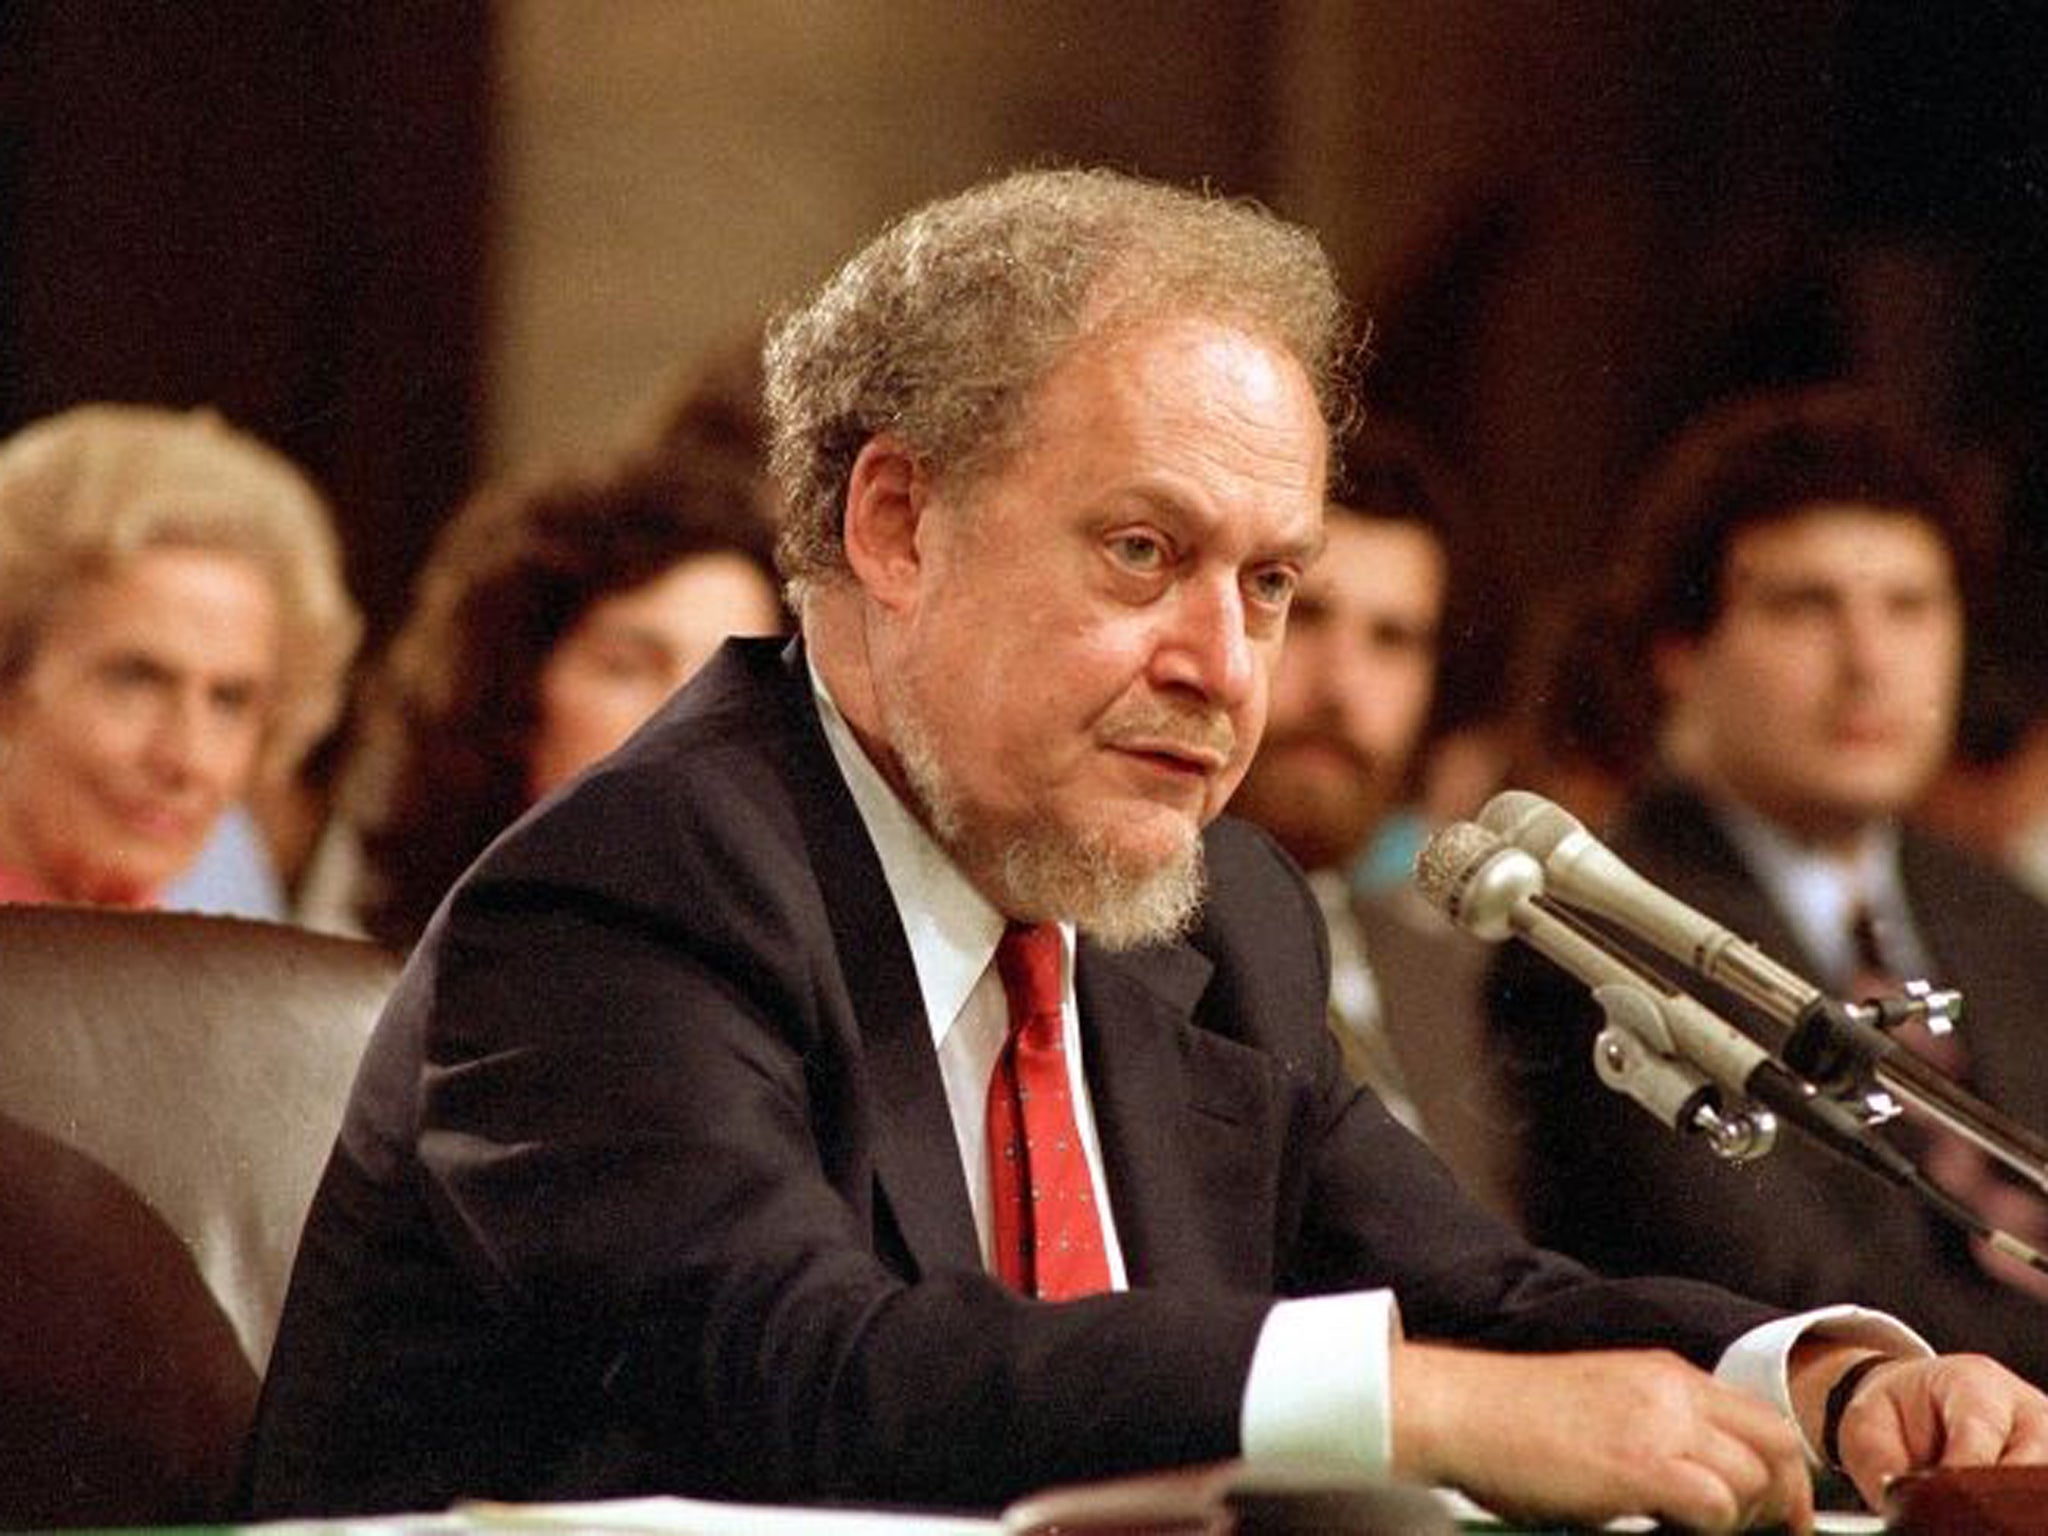 Bork testifies to the Senate Judiciary Committee during his Supreme Court confirmation hearings